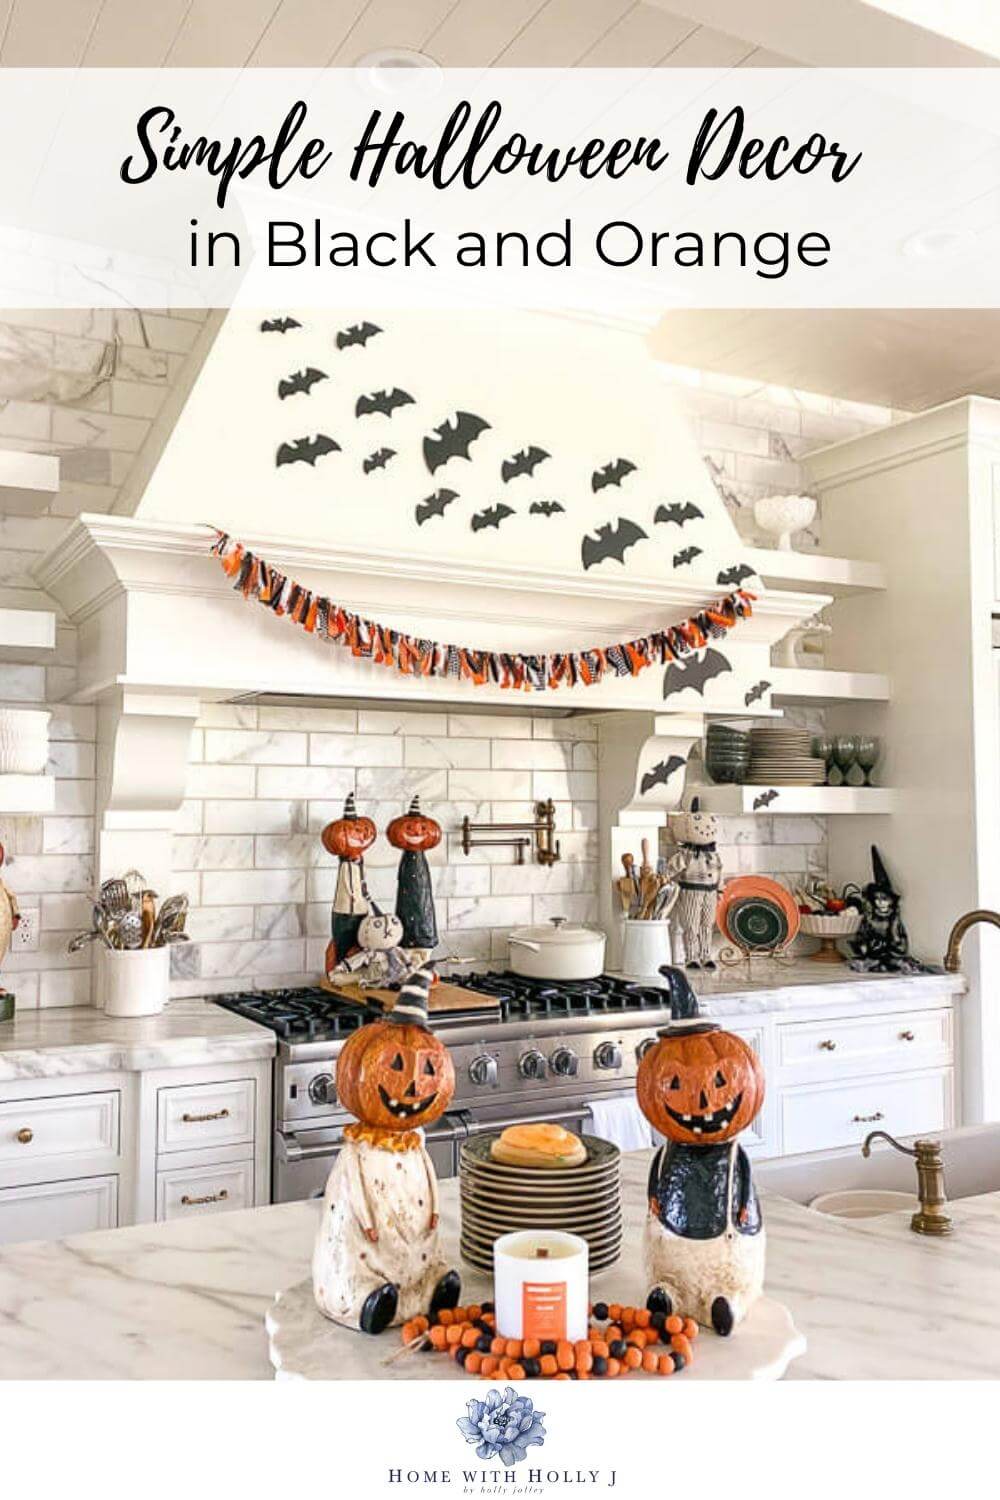 Looking for simple Halloween decor in traditional black and orange? This is exactly what you need. Check it out here.